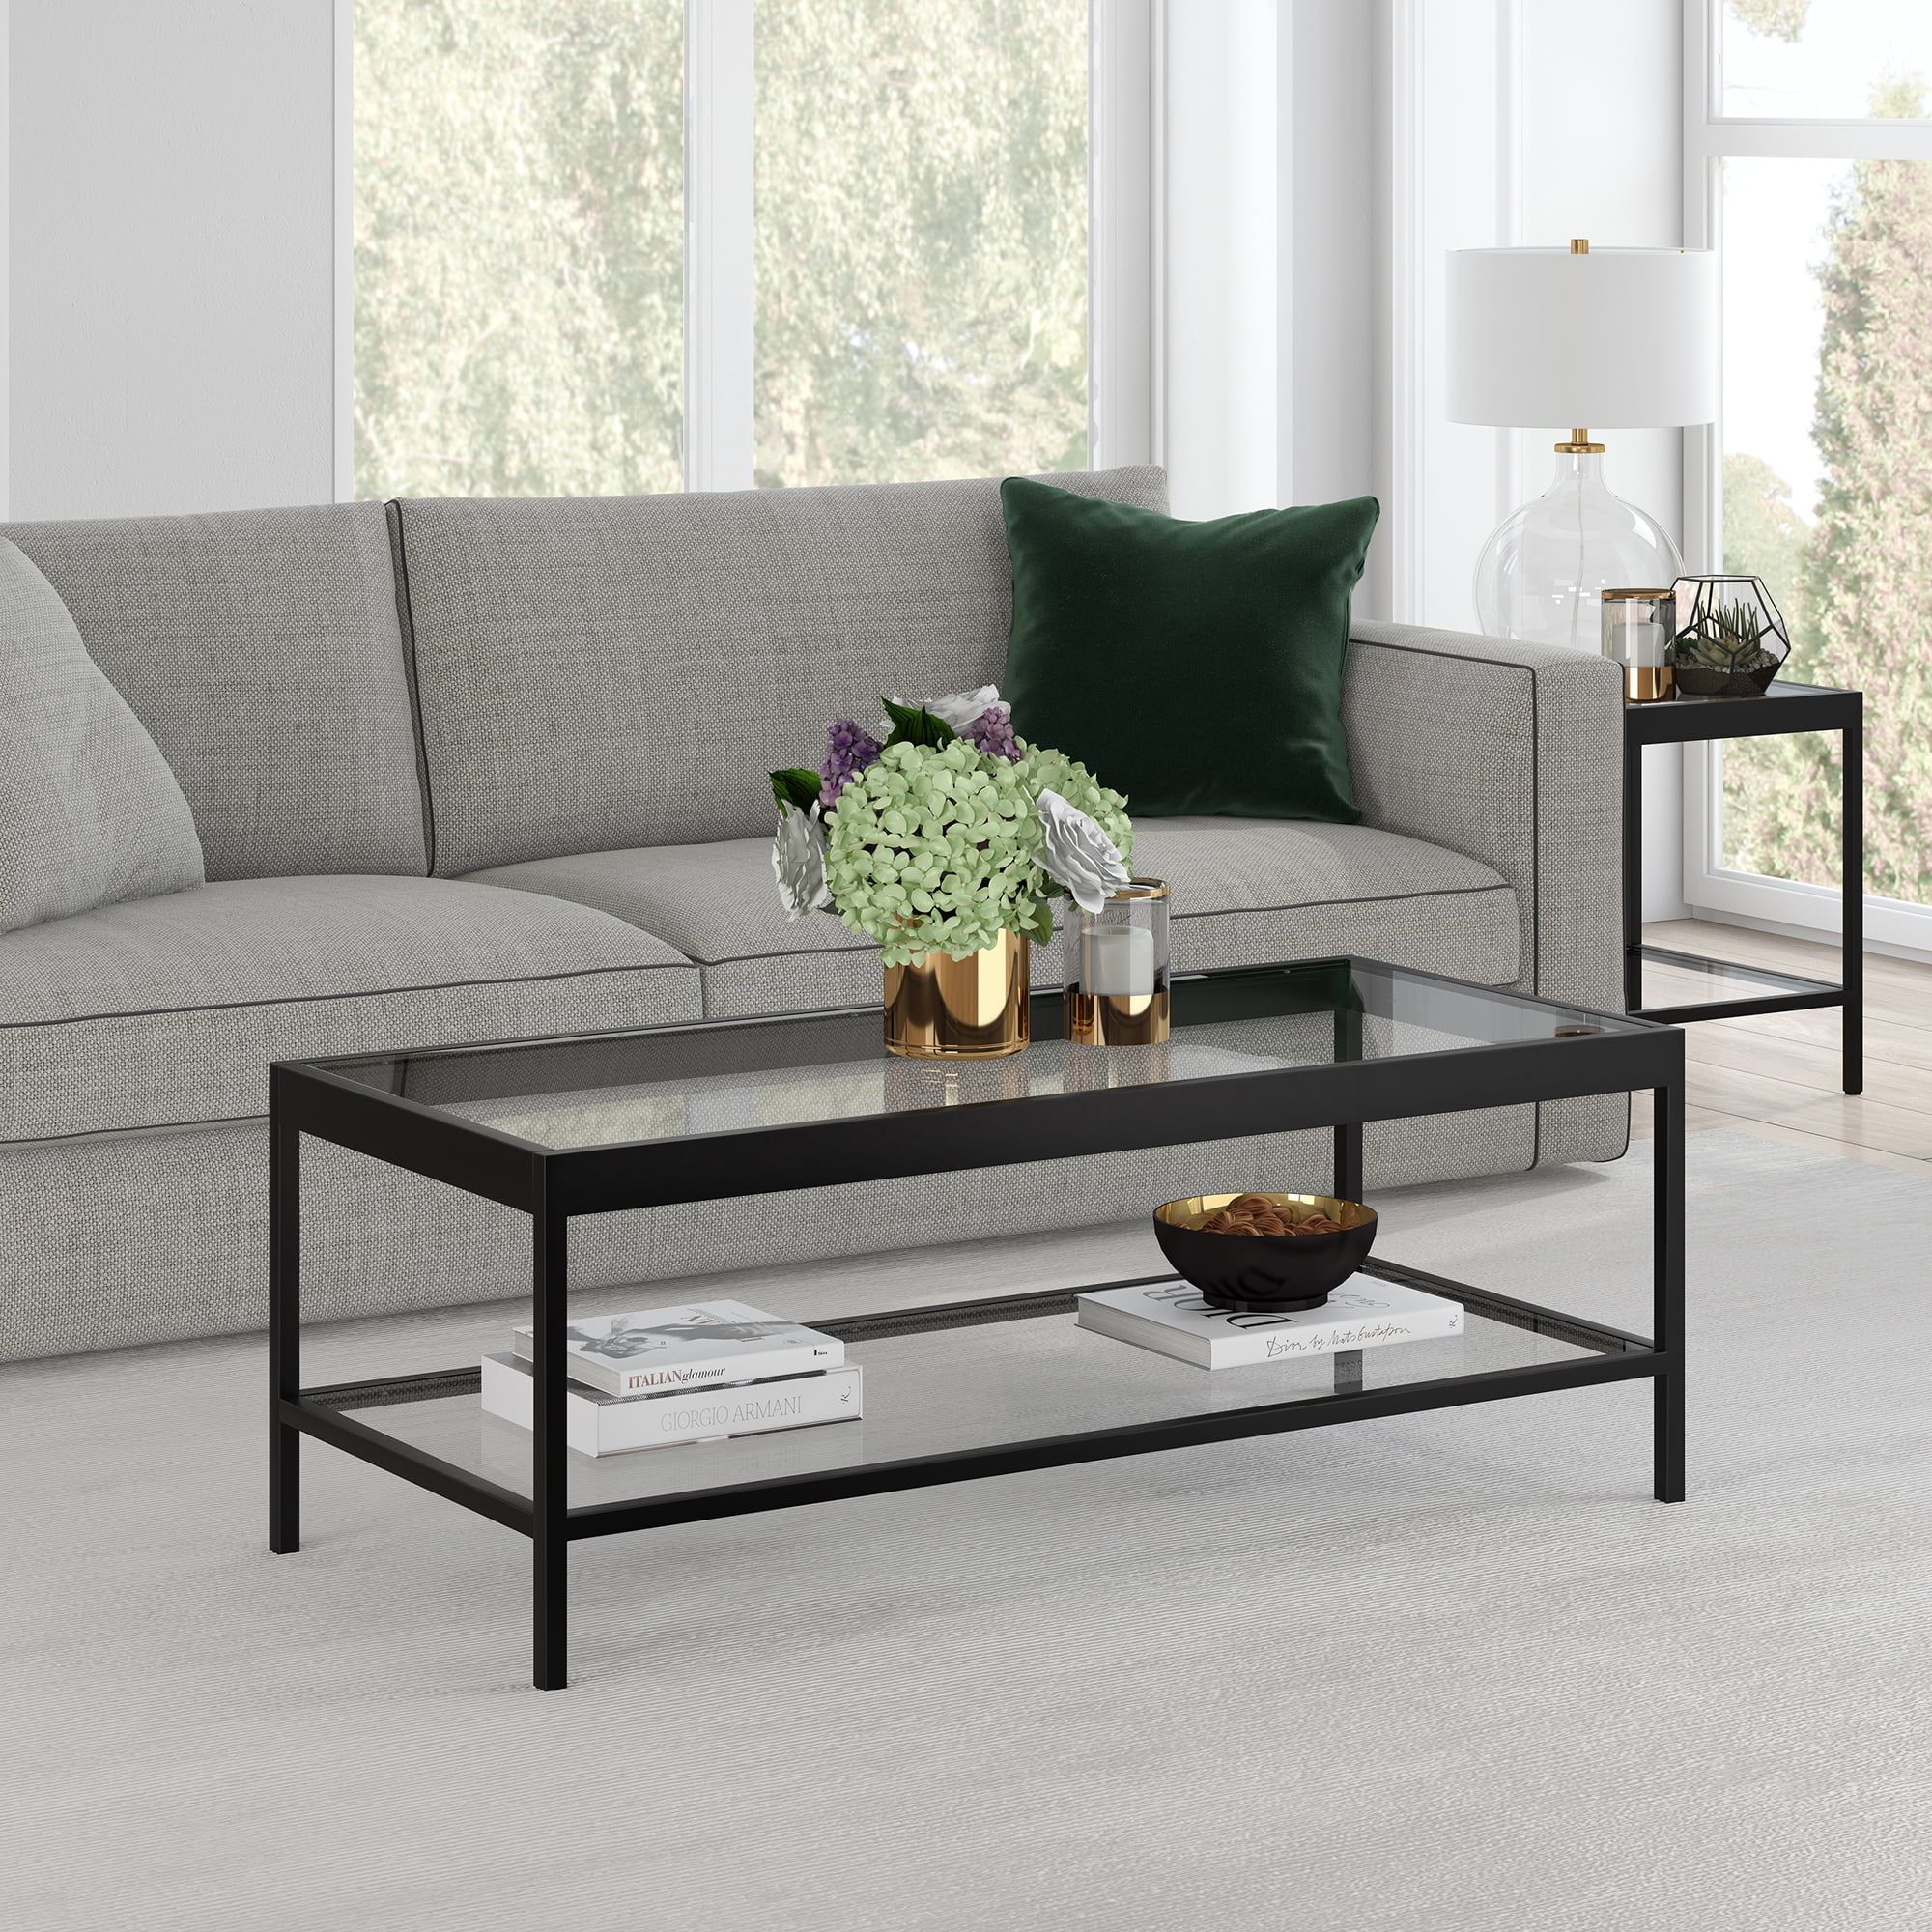 Modern Coffee Table With Open Shelf, Rectangular Table For Living Room Inside Rectangle Coffee Tables (View 4 of 15)